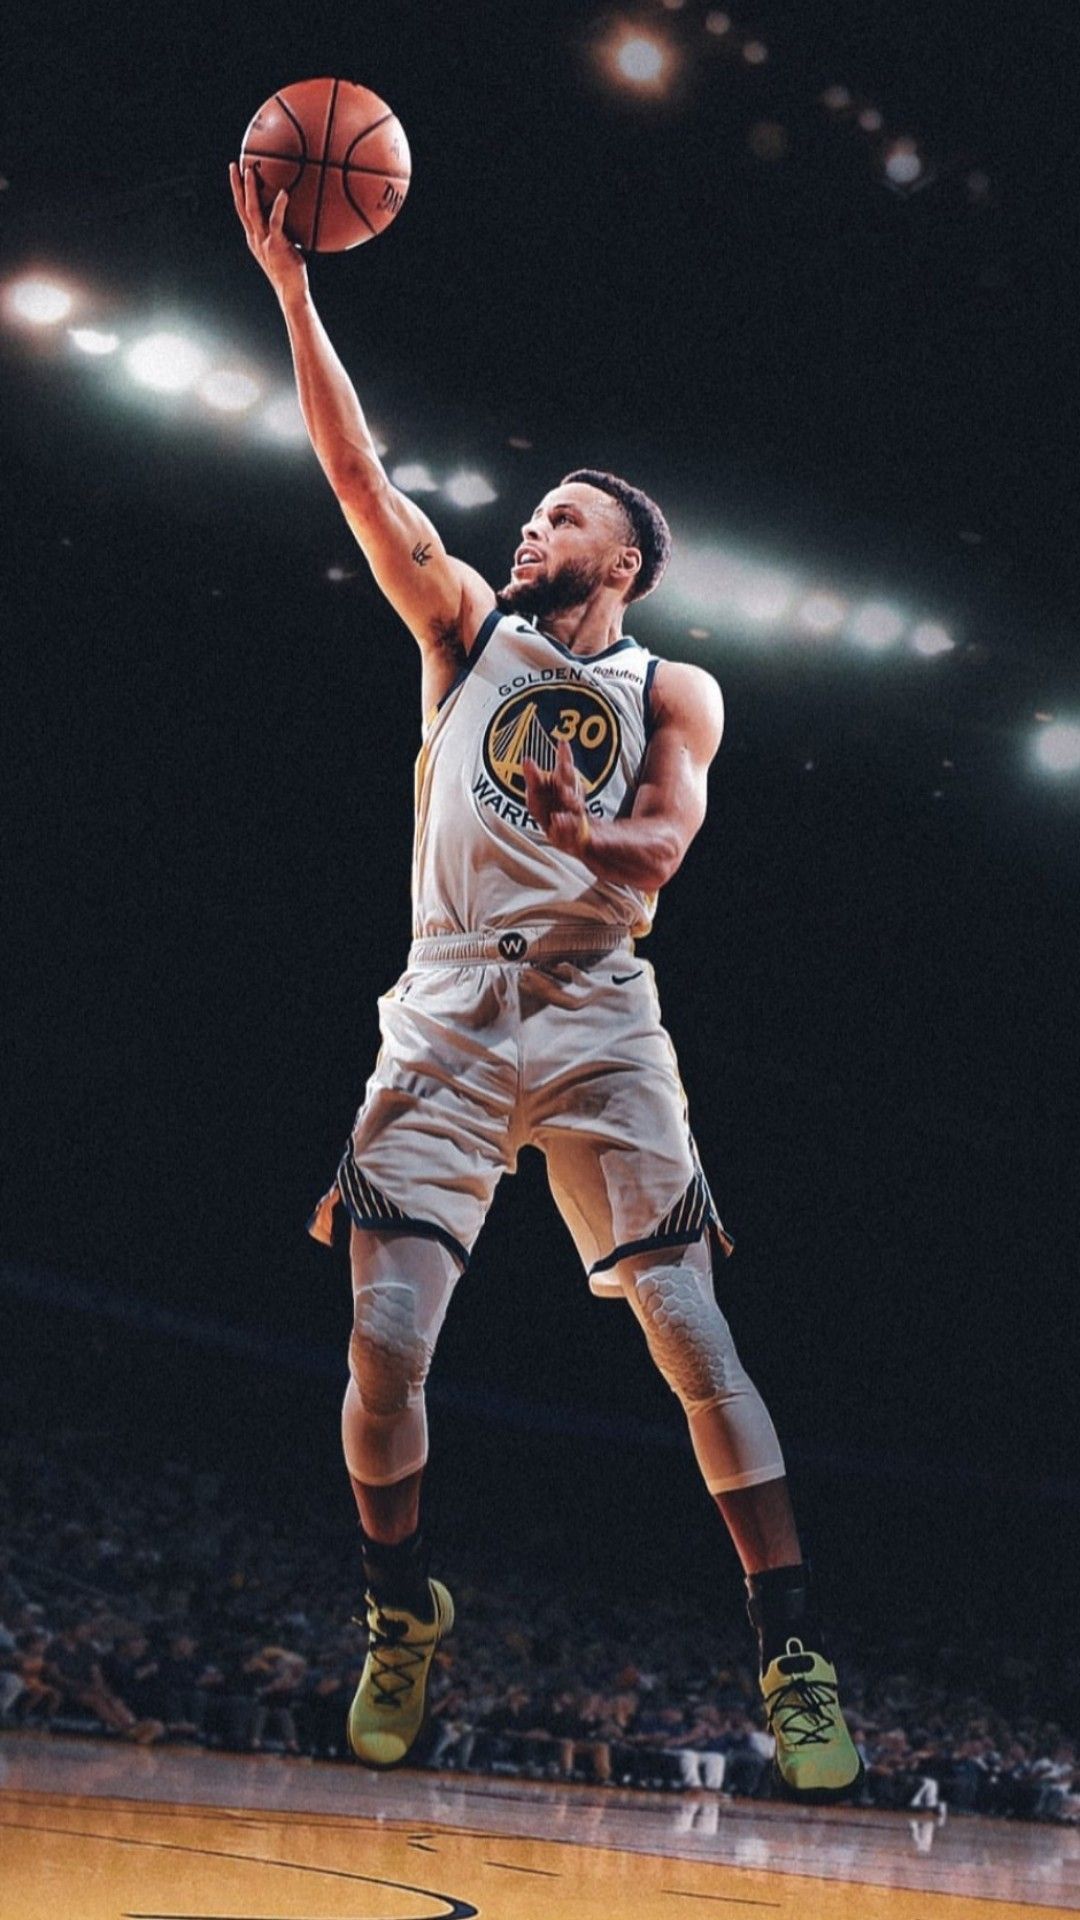 Best Stephen Curry image. Stephen curry, Curry